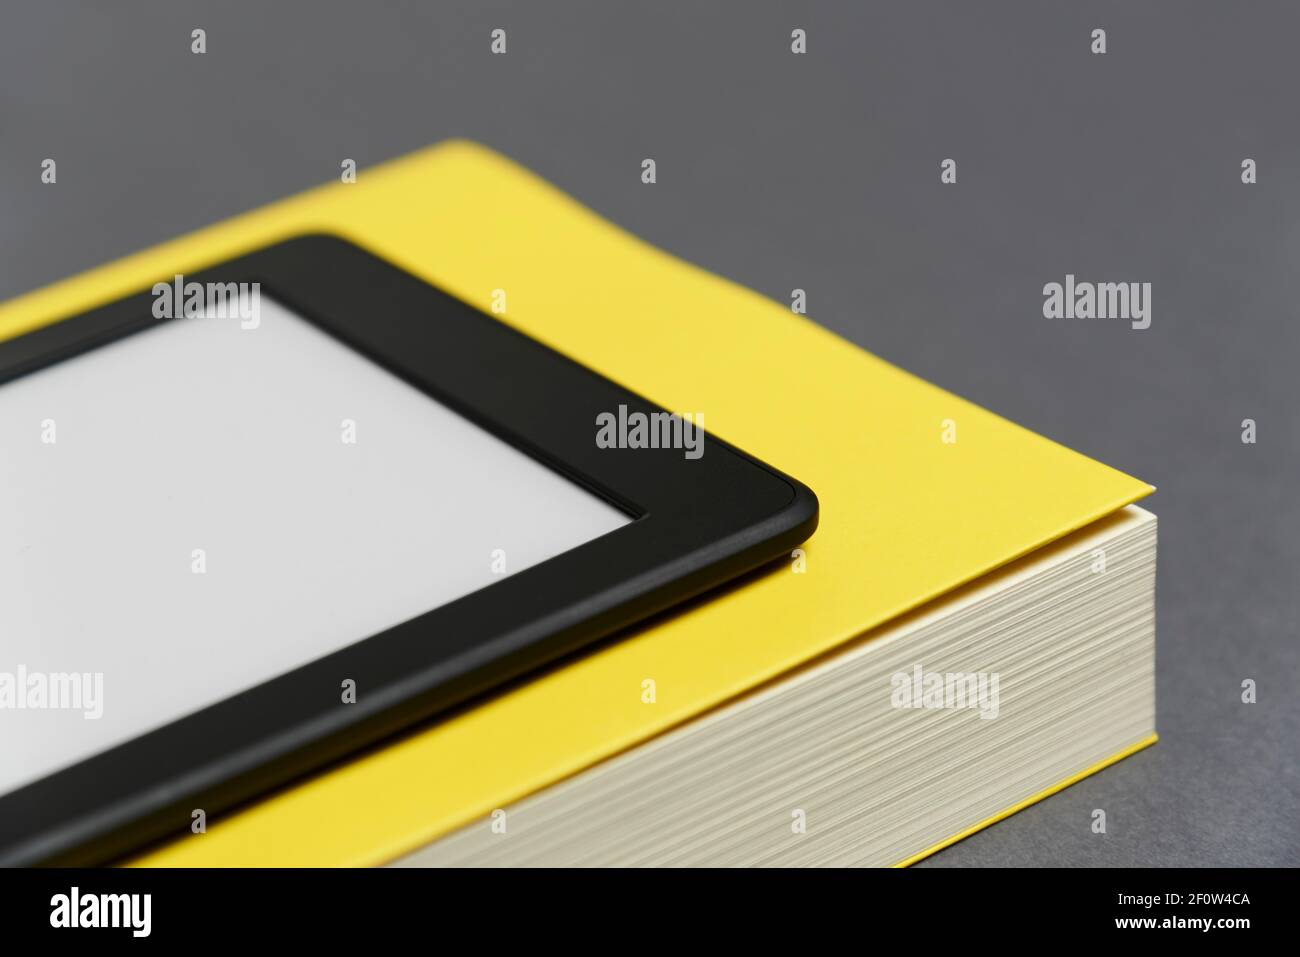 Electronic reader with blank screen and closed yellow book on gray background. Concepts of technology and reading. Image with copy space. Stock Photo